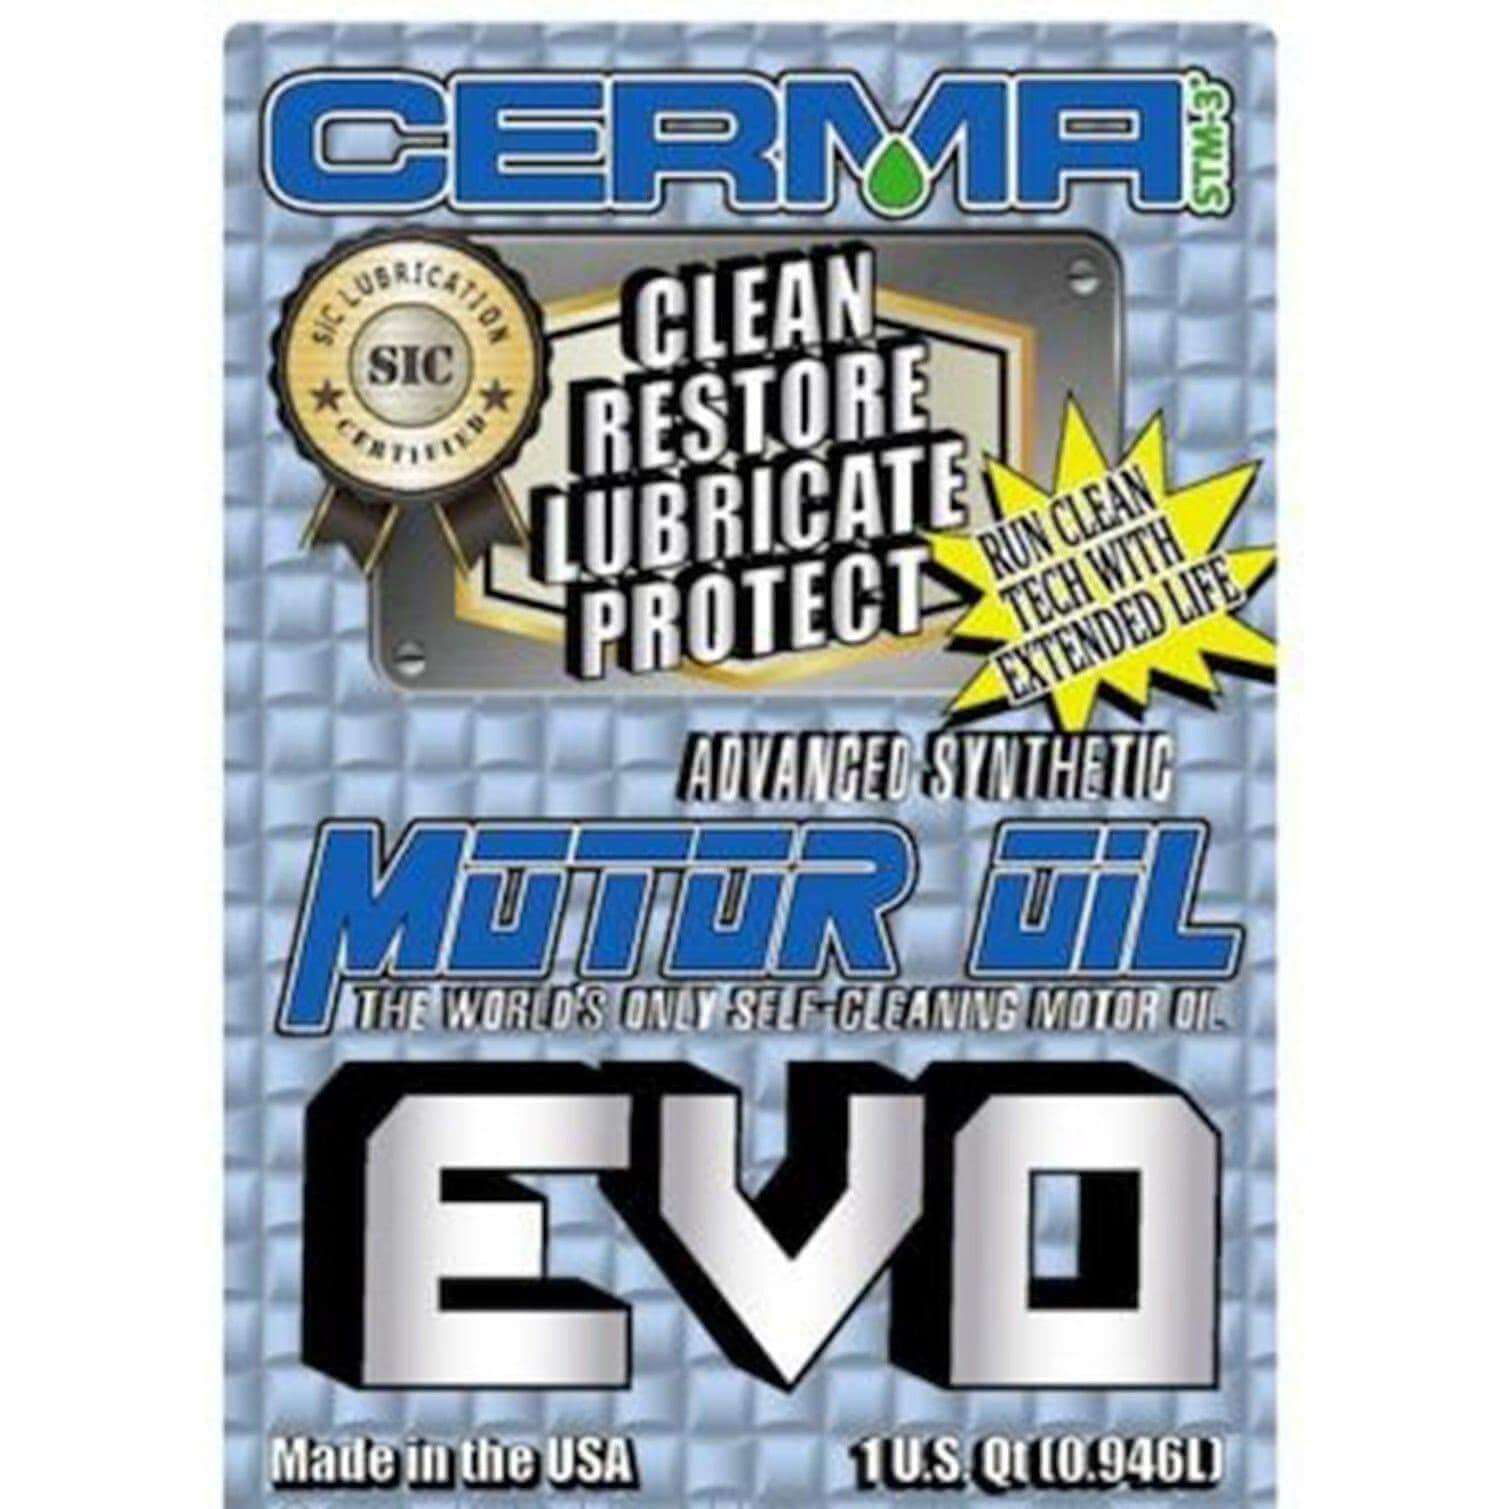 Cerma EVO Ceramic Synthetic Motor Oil at $19.26 only from cermatreatment.com